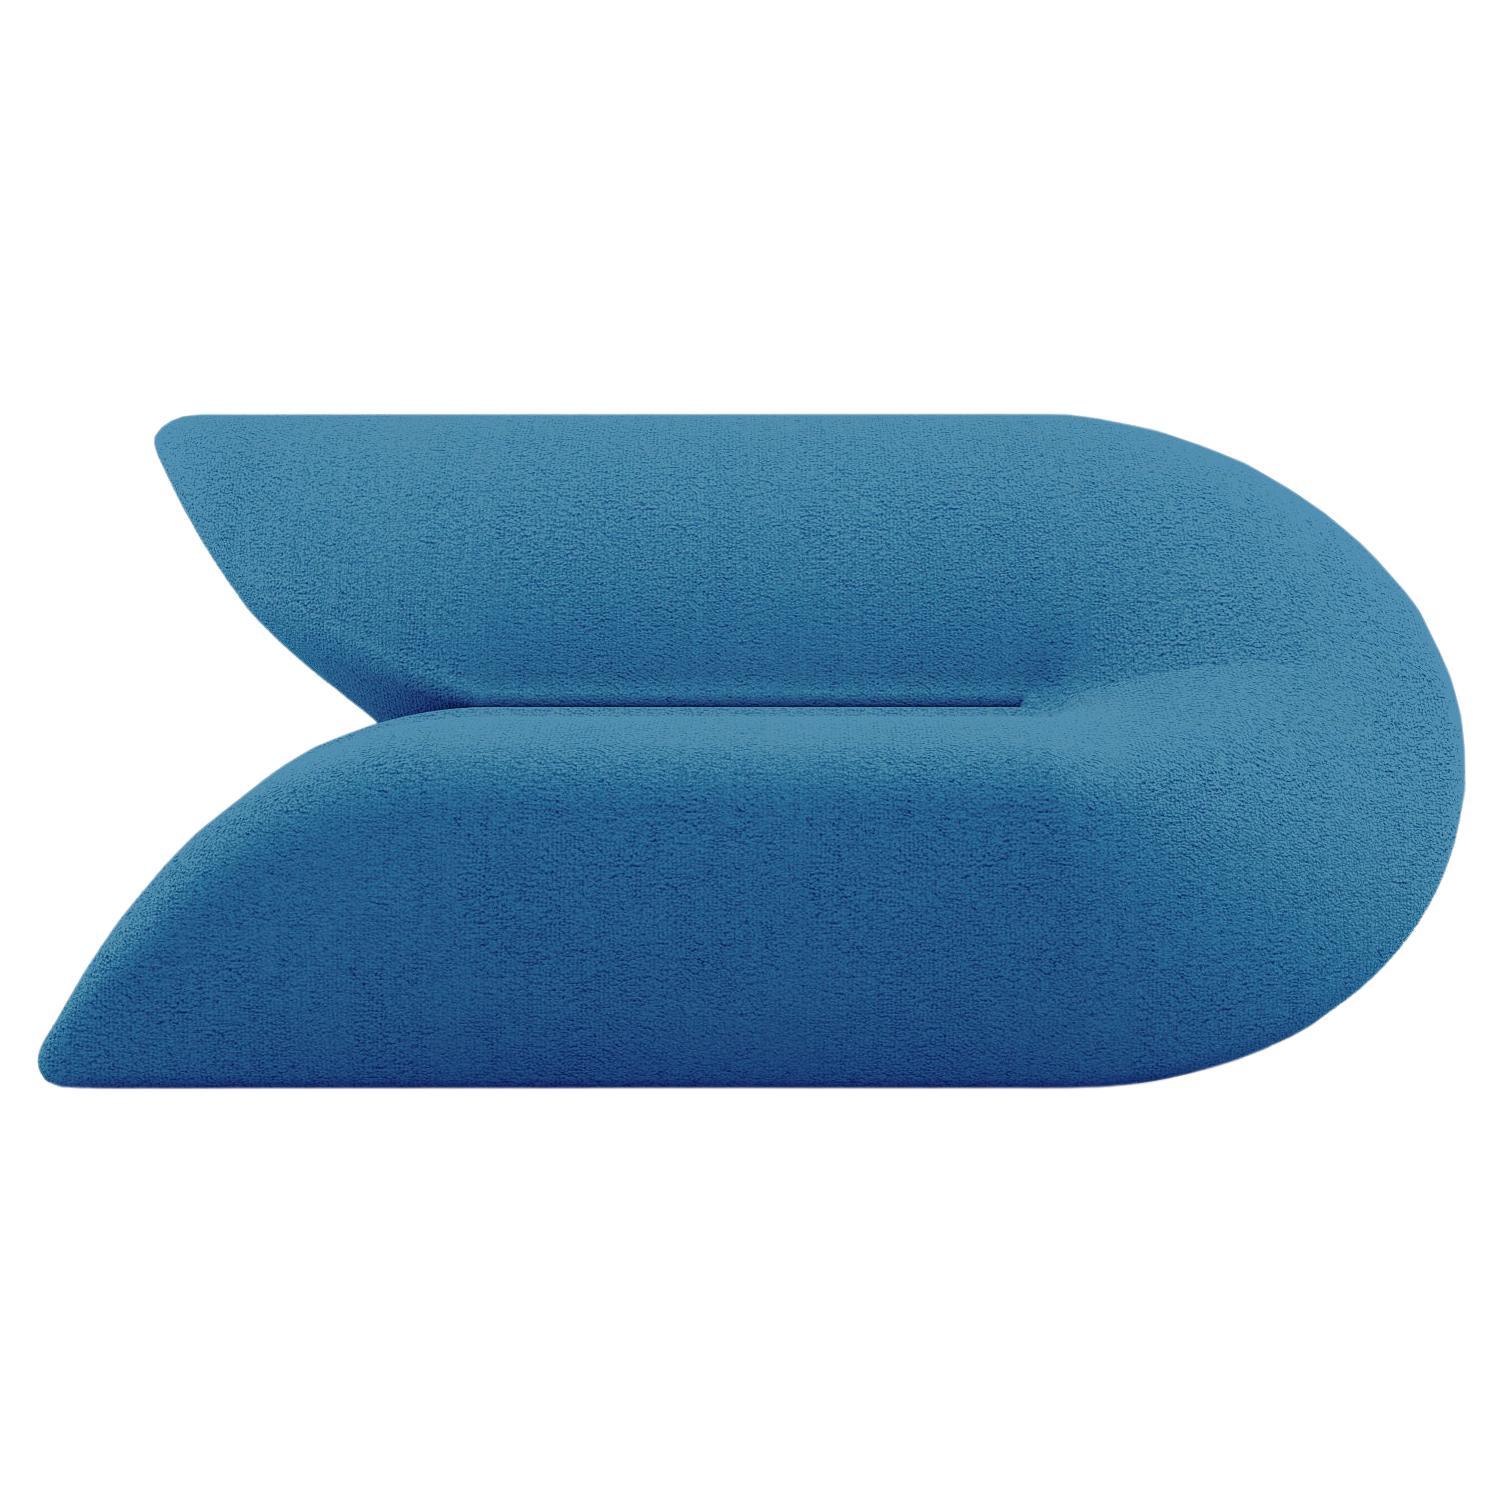 Delta Sofa - Modern Classic Blue Upholstered Two Seat Sofa For Sale